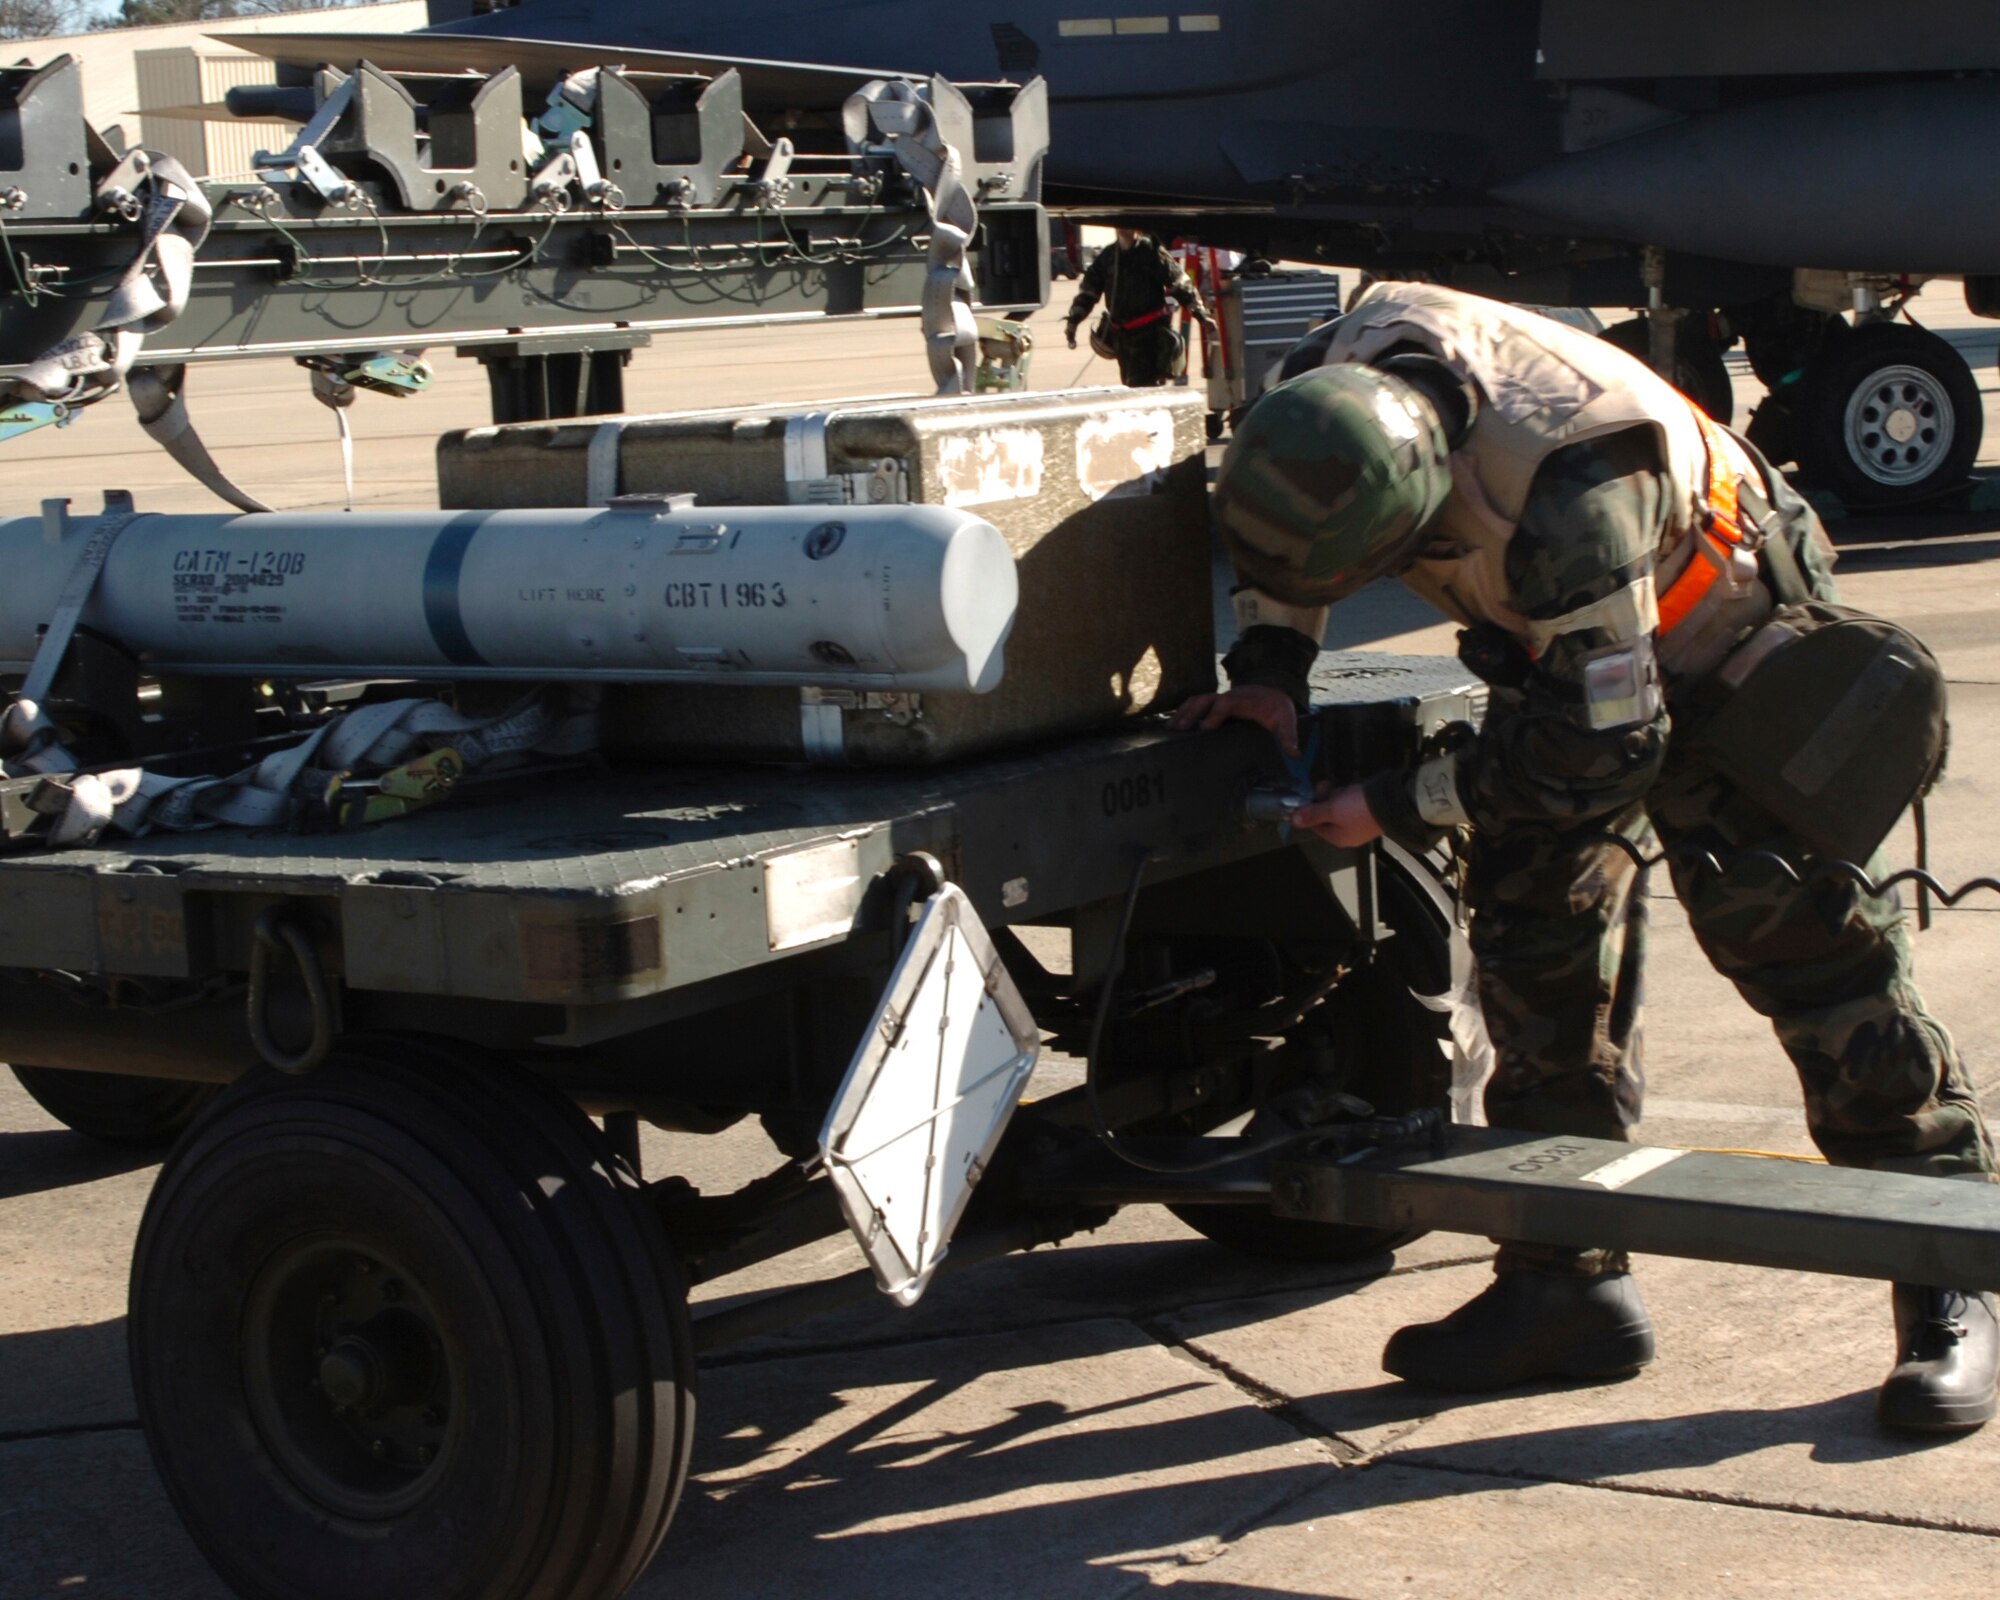 A 336th Weapons Airman unhooks a missile from a cart during the ORE December 12. The exercise is preparation for an operational readiness inspection January 23-26 that will evaluate the 4th Fighter Wing's ability to employ aircraft and resources, survive and operate, conduct mission support activities in a steady state combat environment, and to provide training opportunities to improve on existing capabilities. (US Air Force photo by Senior Airman Micky Bazaldua)(released) 